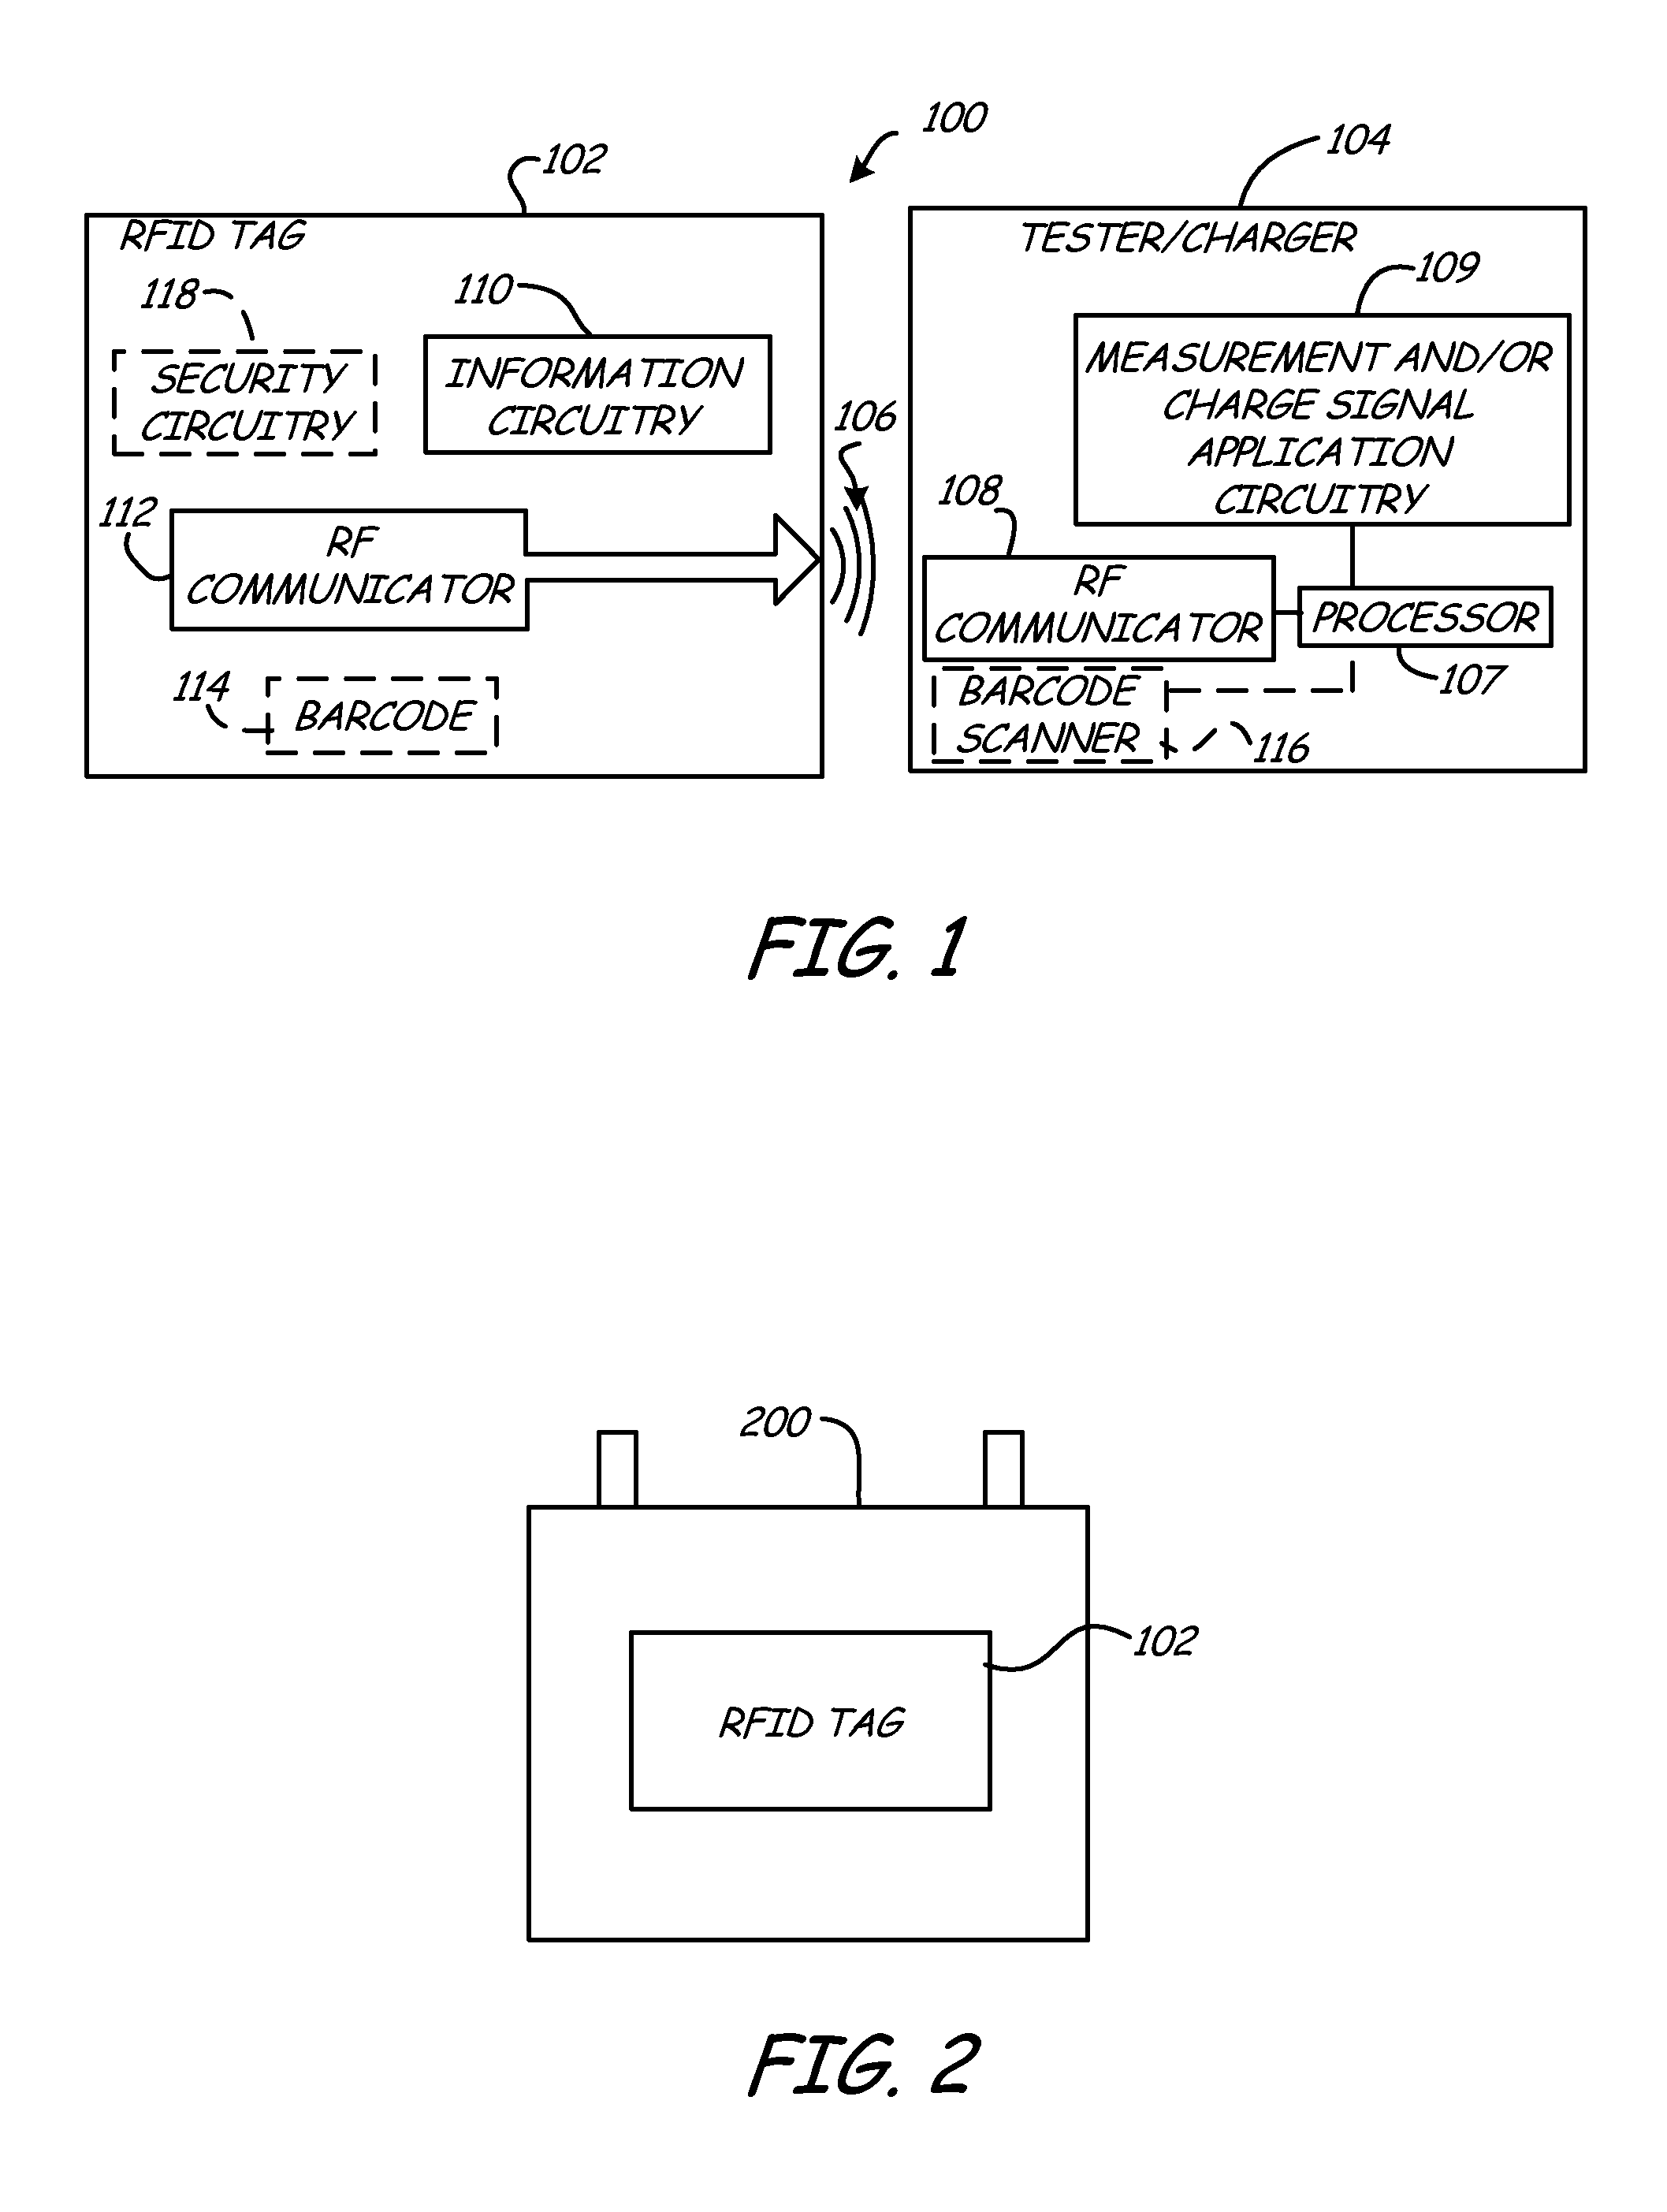 System for automatically gathering battery information